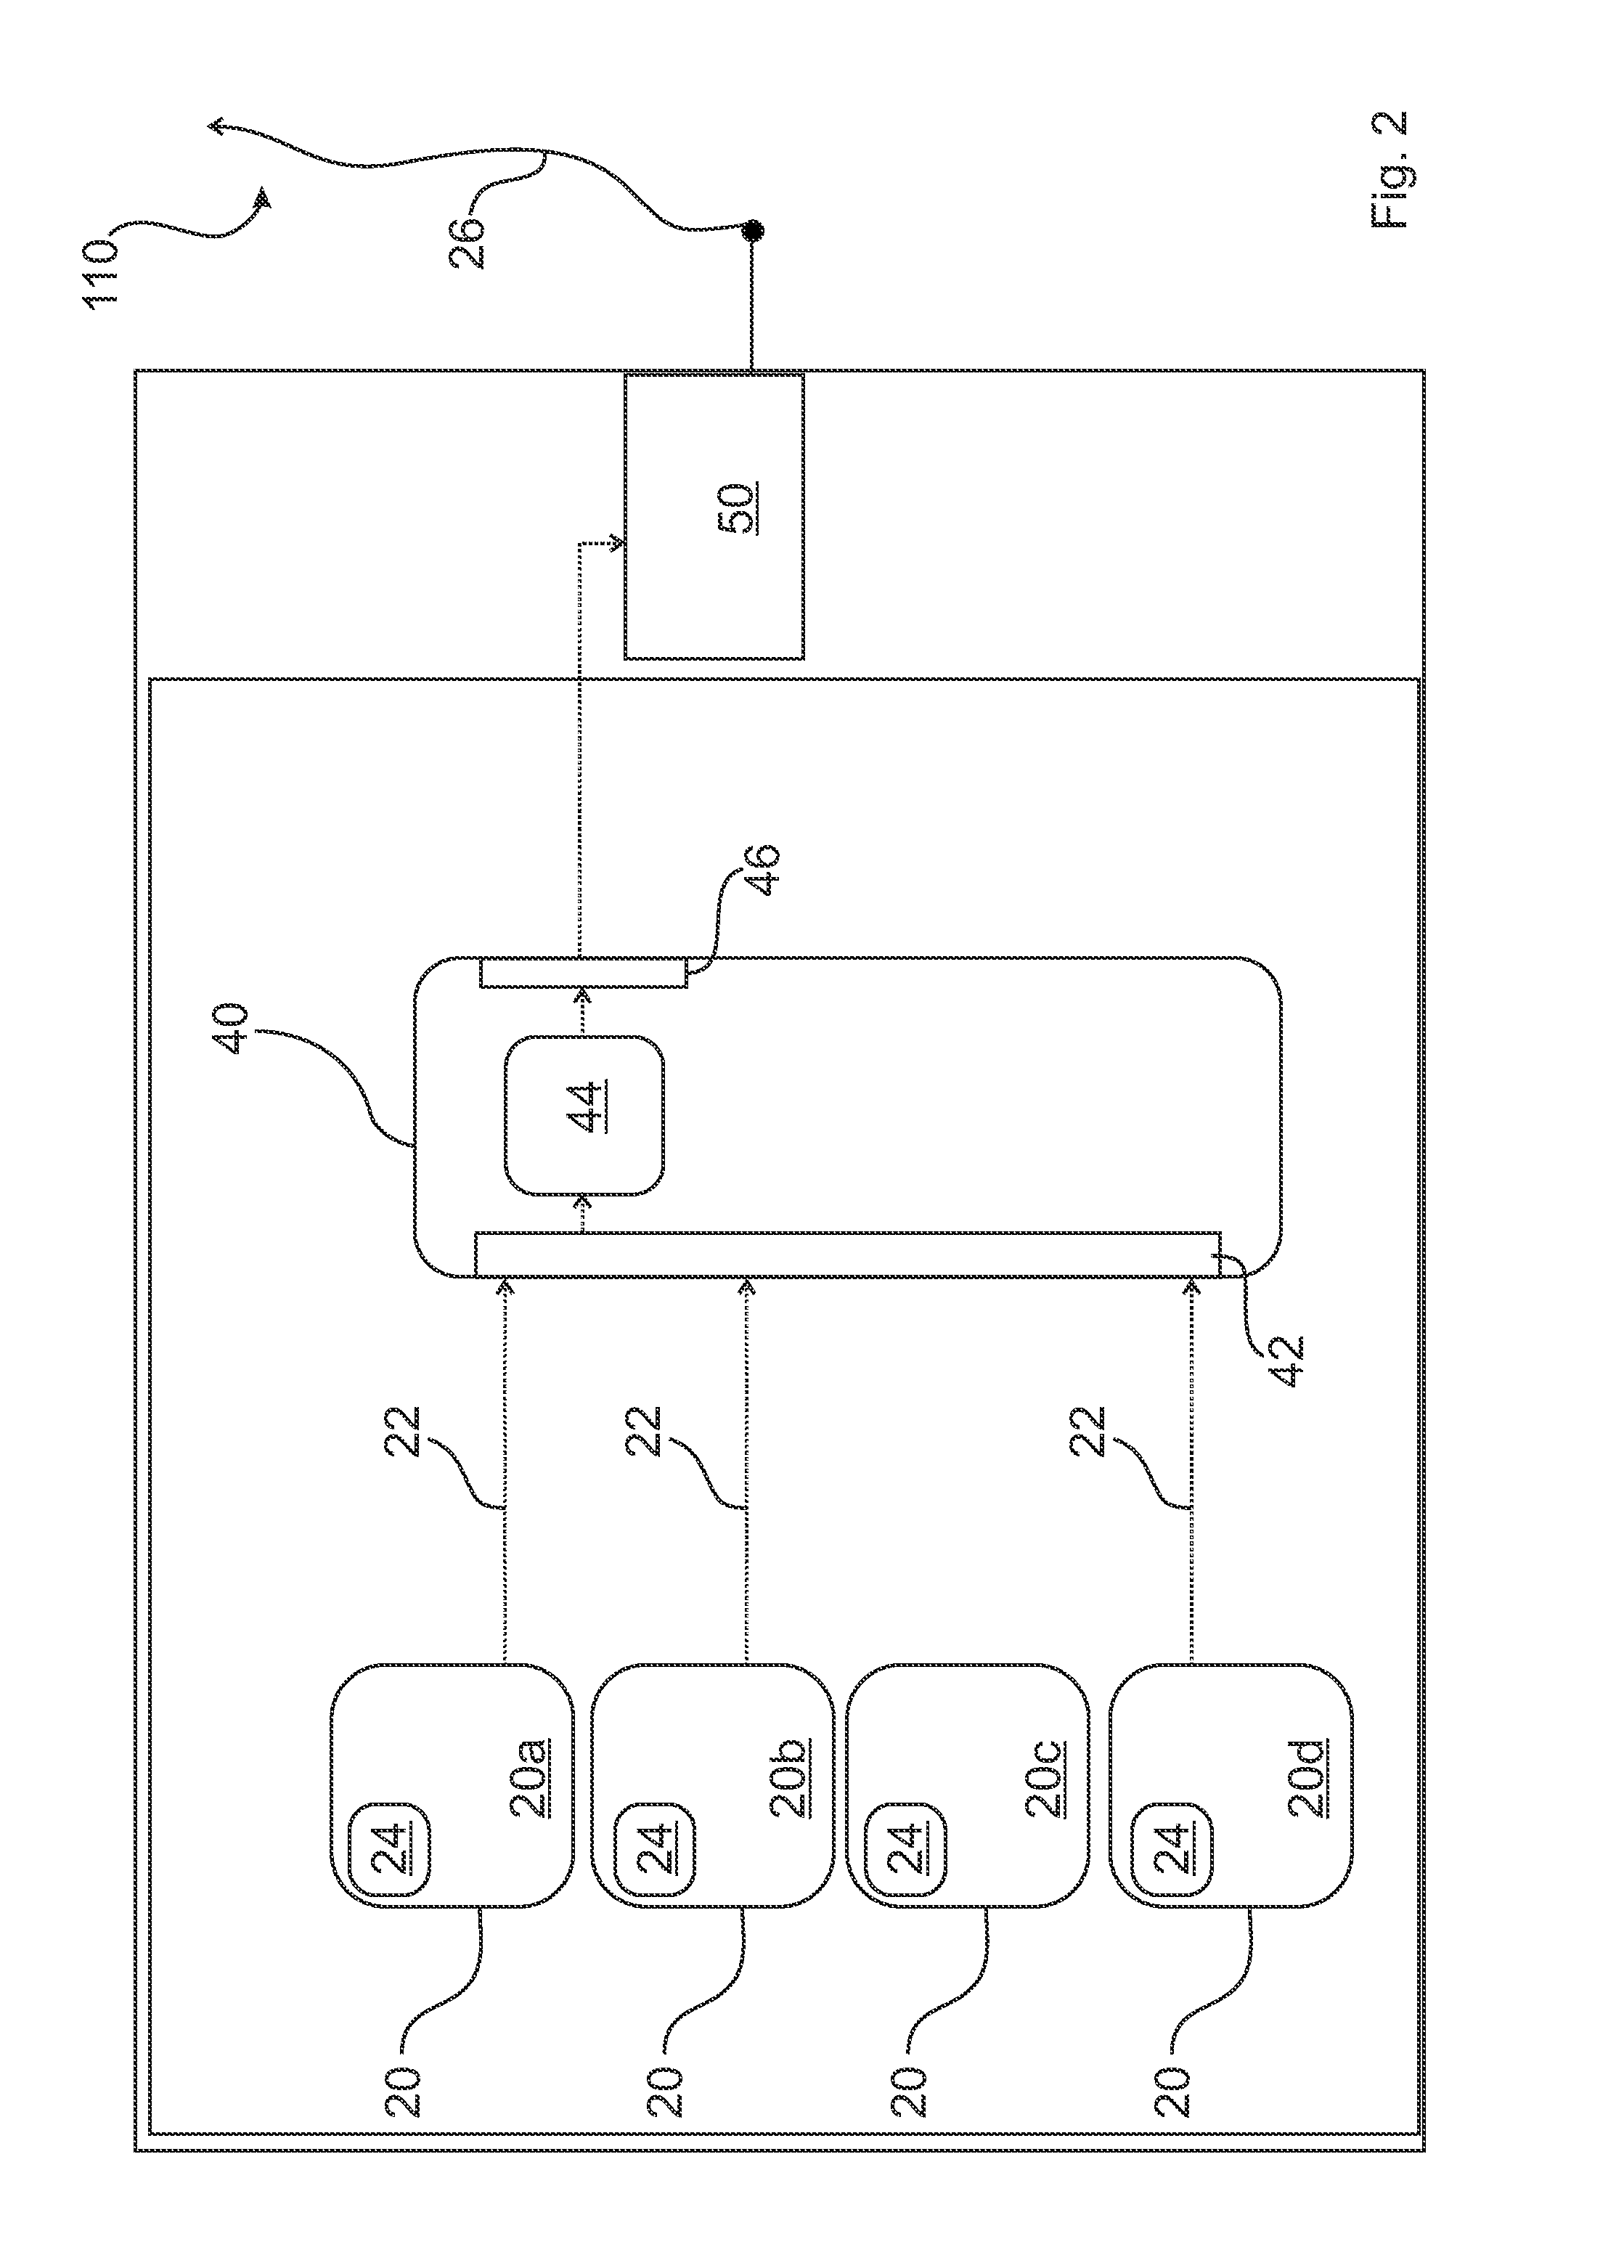 Method for controlling data traffic between a communication device and a communications network via a communications link